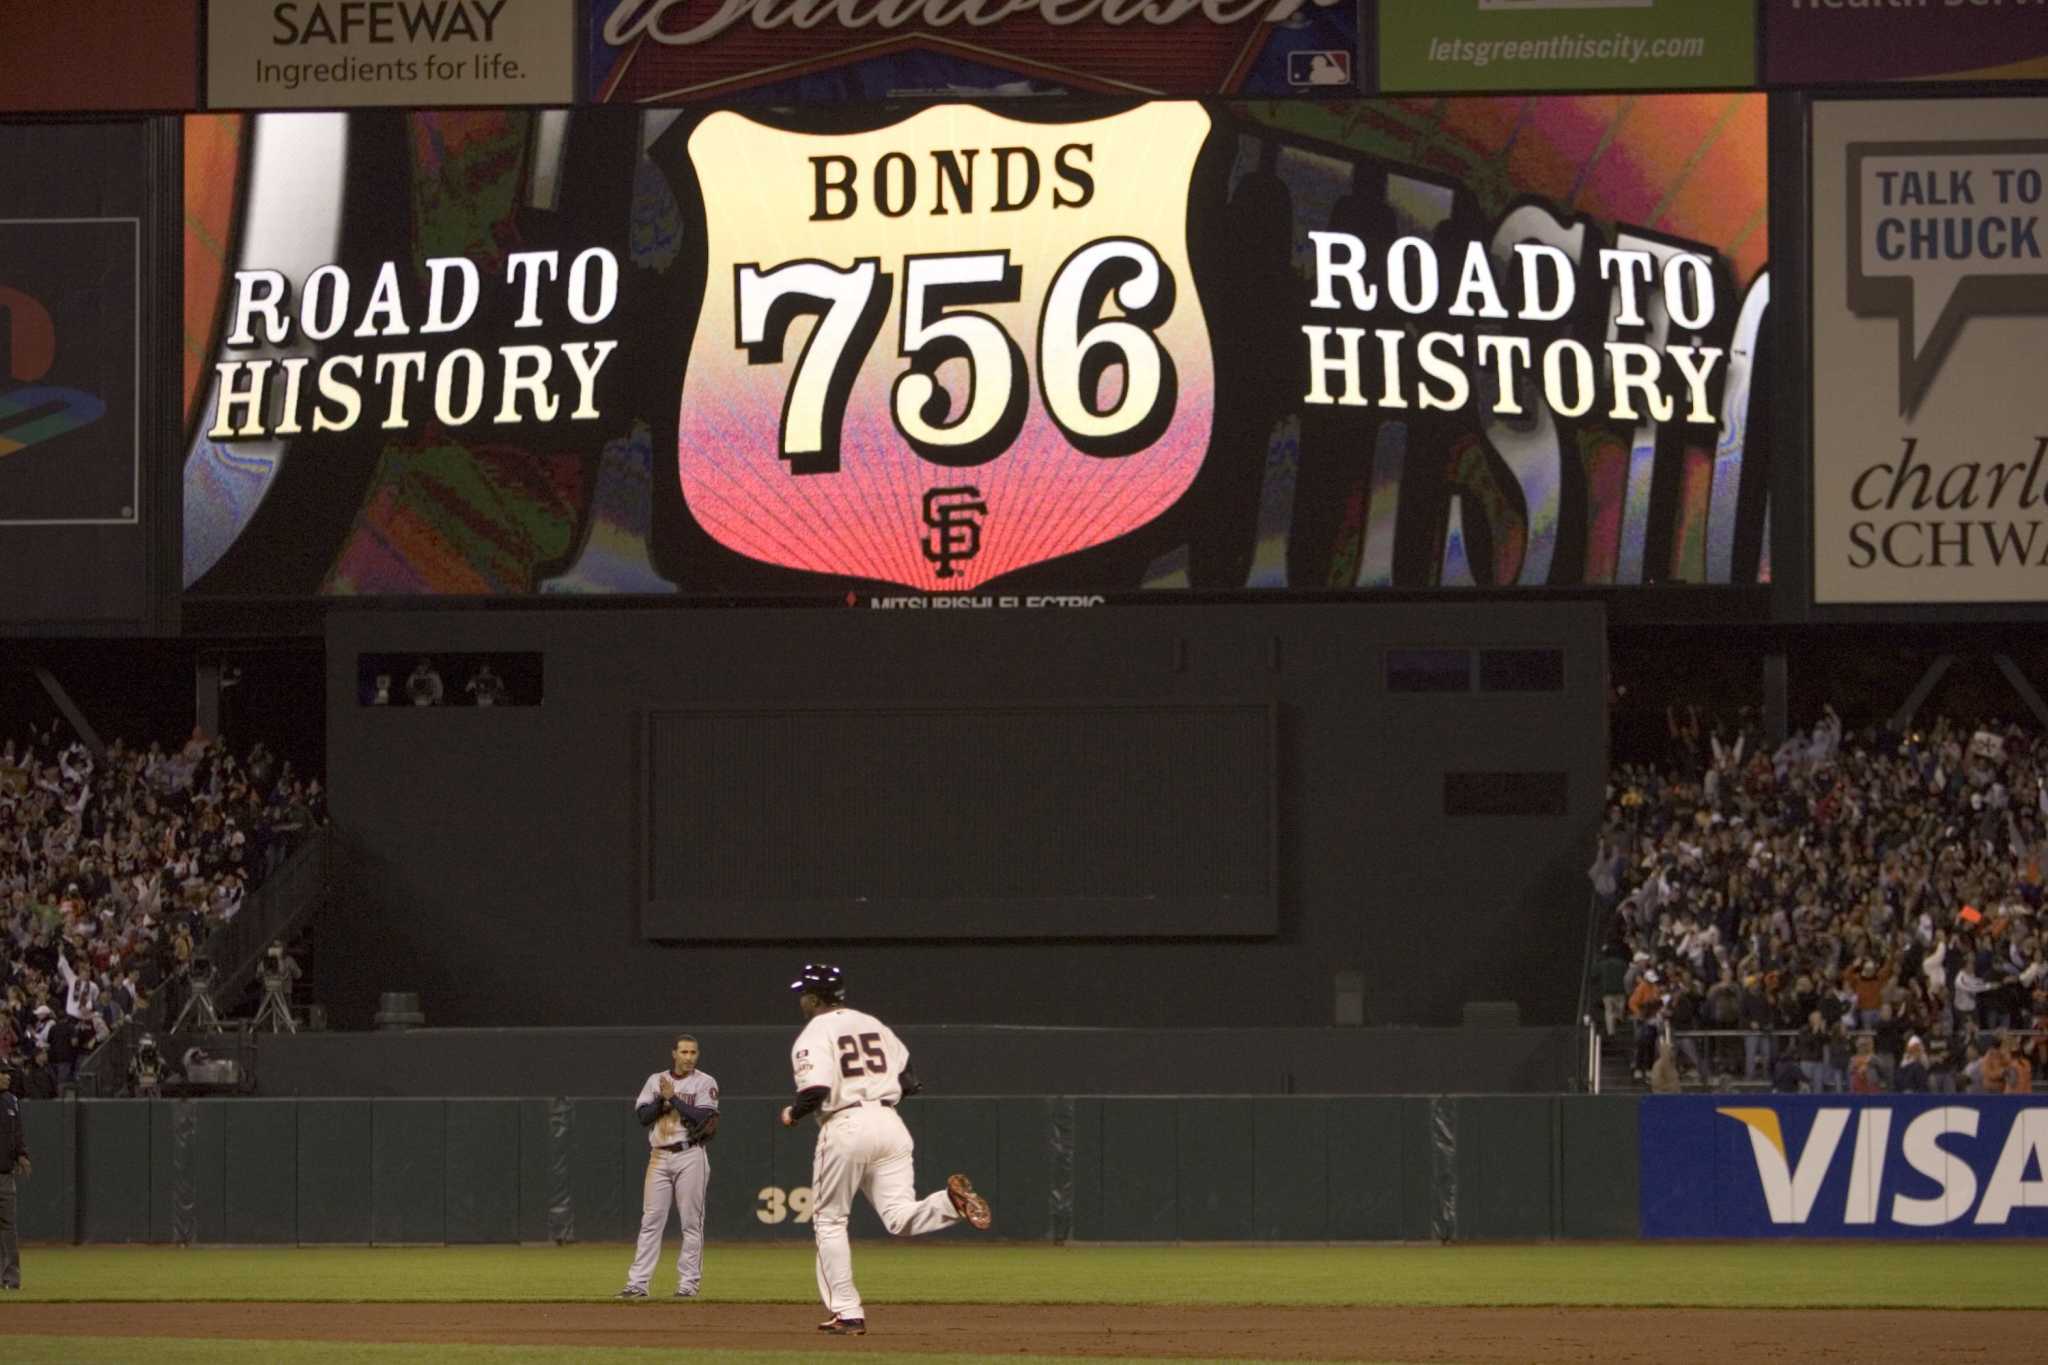 16 years ago today, Barry Bonds hit home run No. 756 to become the